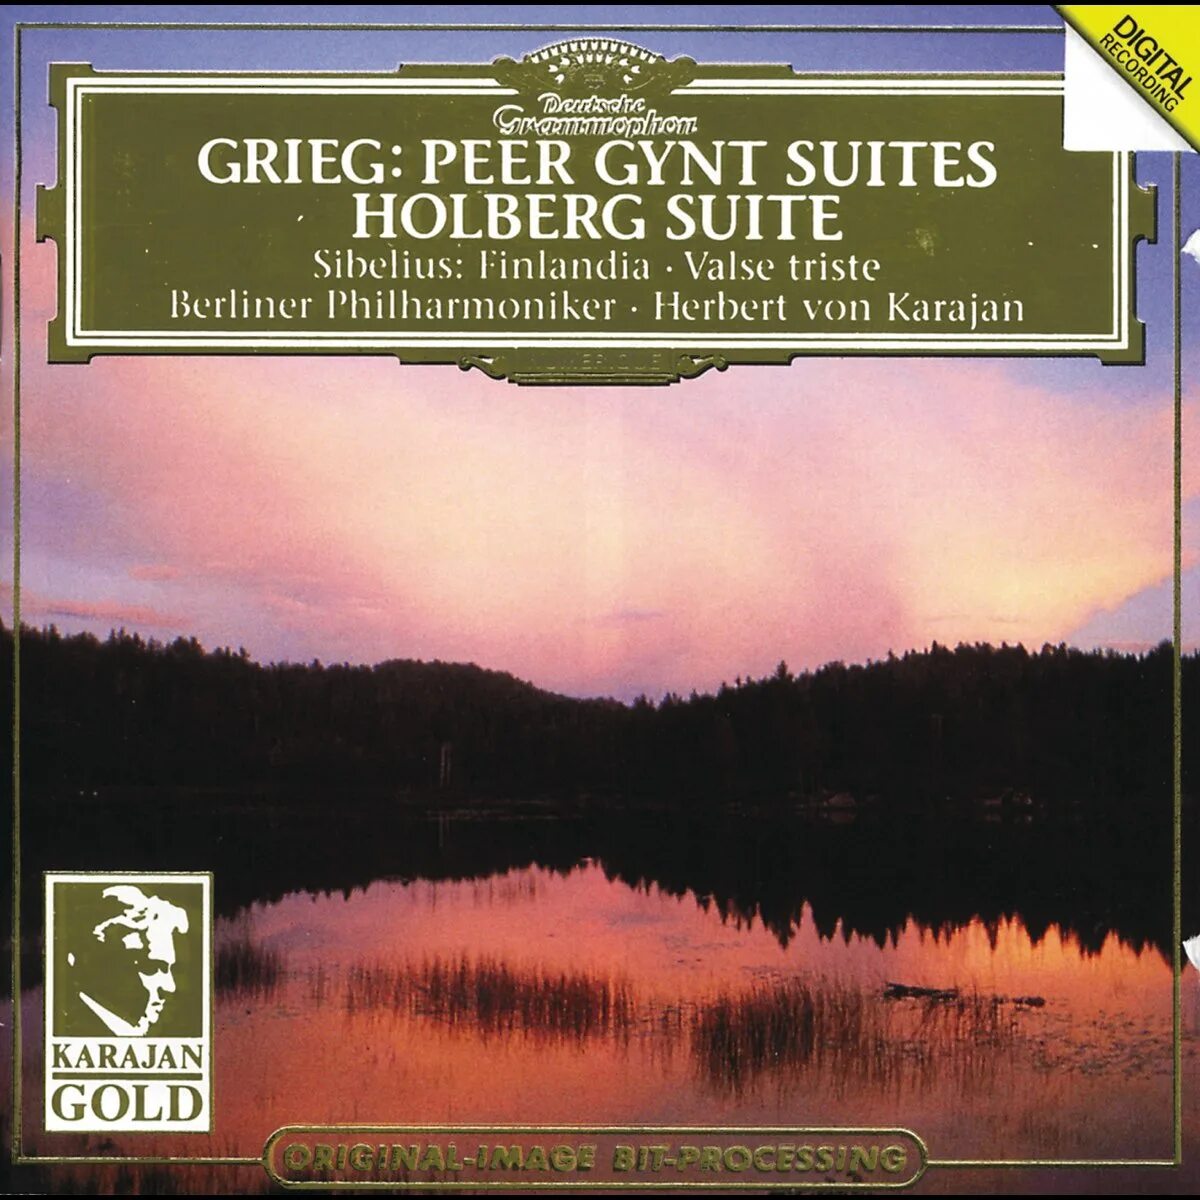 Grieg: peer Gynt Suite no. 1, "in the Hall of the Mountain King". Peer Gynt Suite no. 1, op. 46. Peer Gynt Suite no 1 op 46 in the Hall.